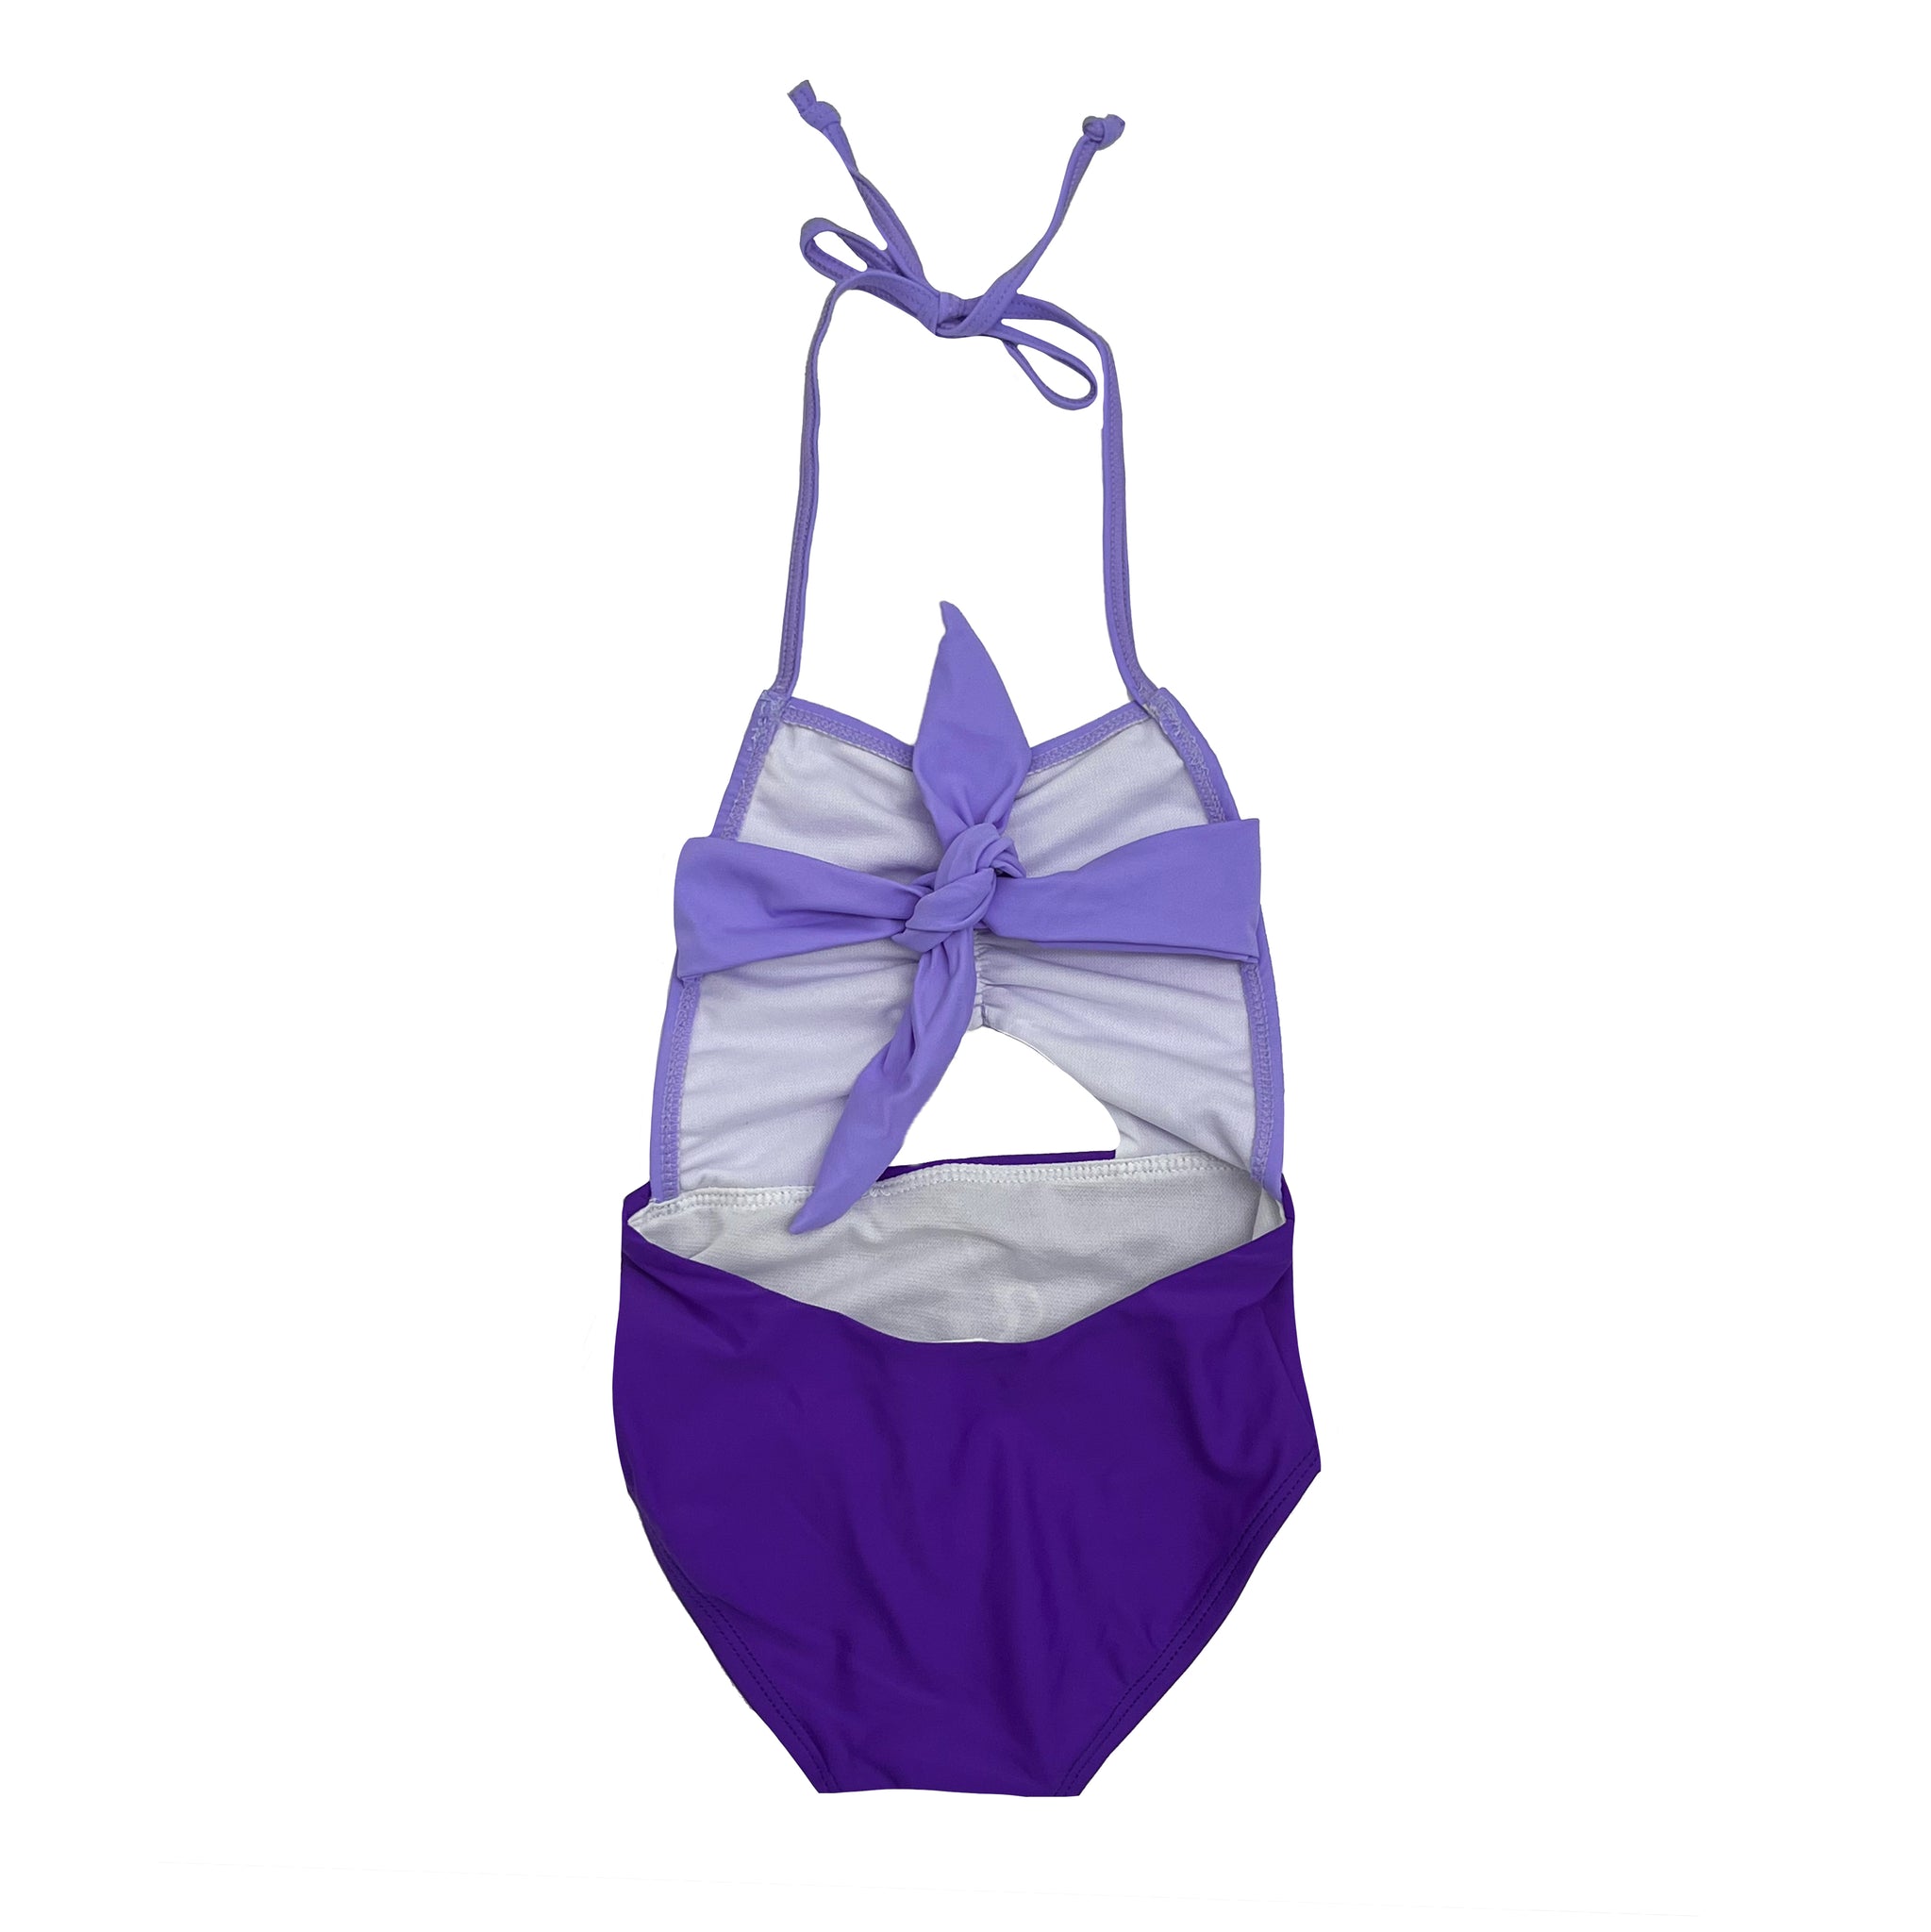 Figleaves Curve Embellished Swimsuit One Piece Beach Pool Holiday Purple